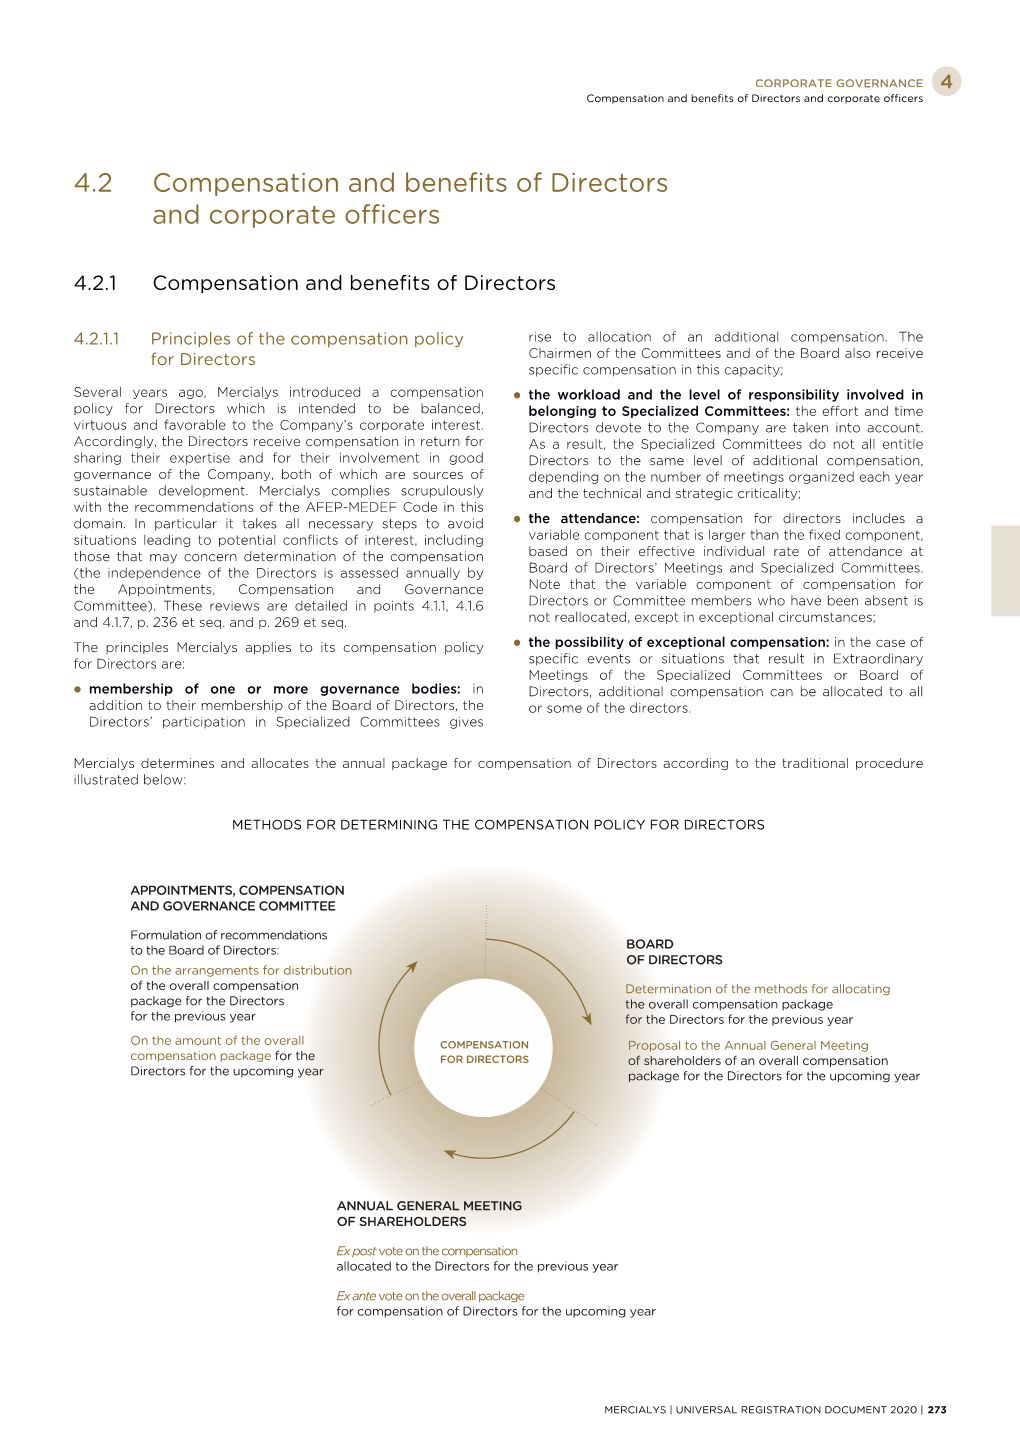 Compensation and Benefits of Directors 4.2 And